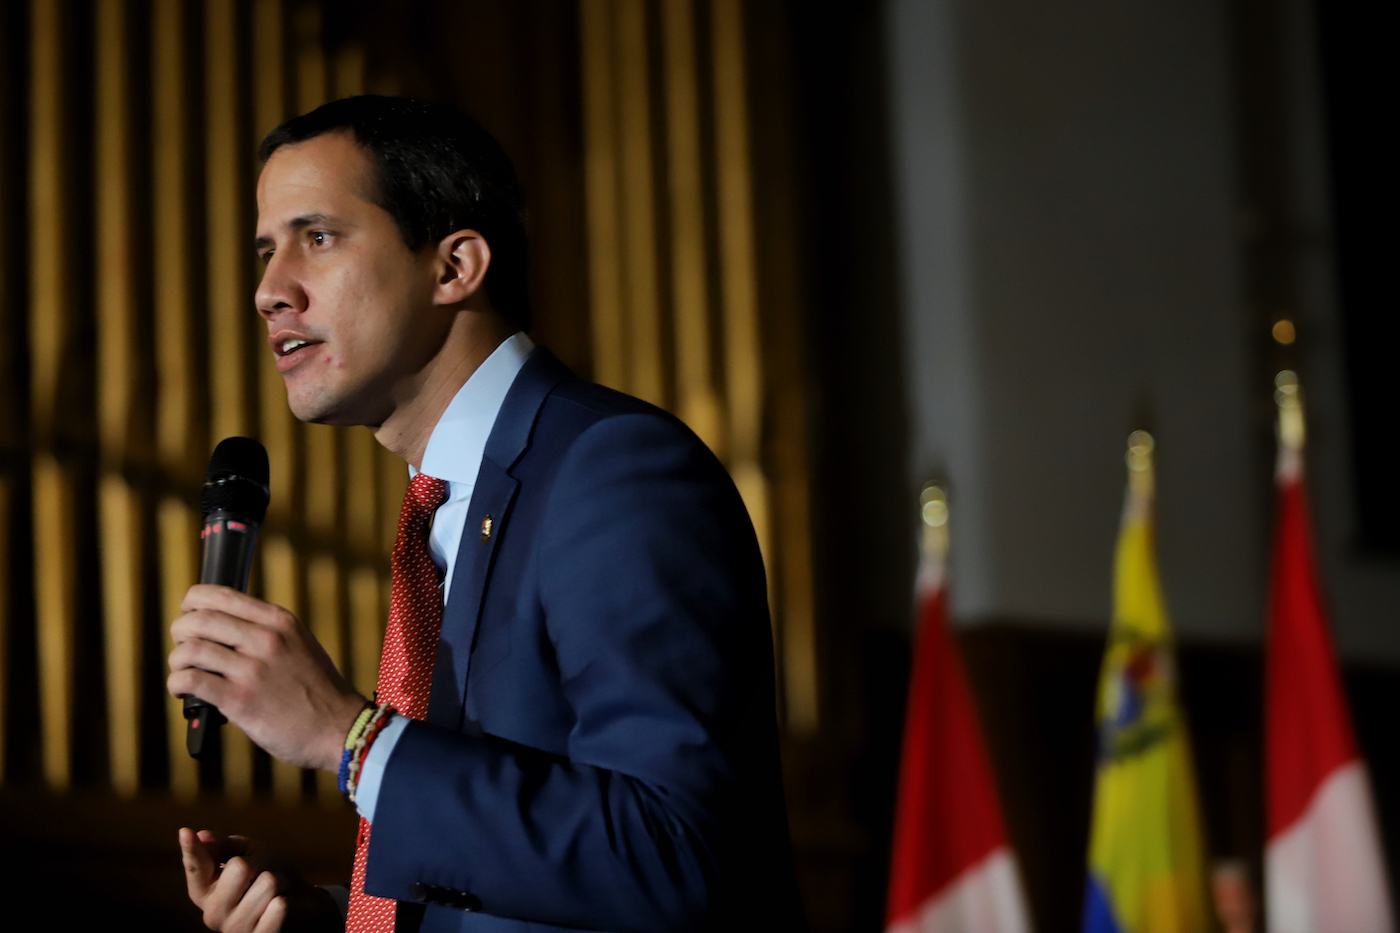 President (e) Guaidó reiterates his call for unity to confront and defeat Maduro’s dictatorship